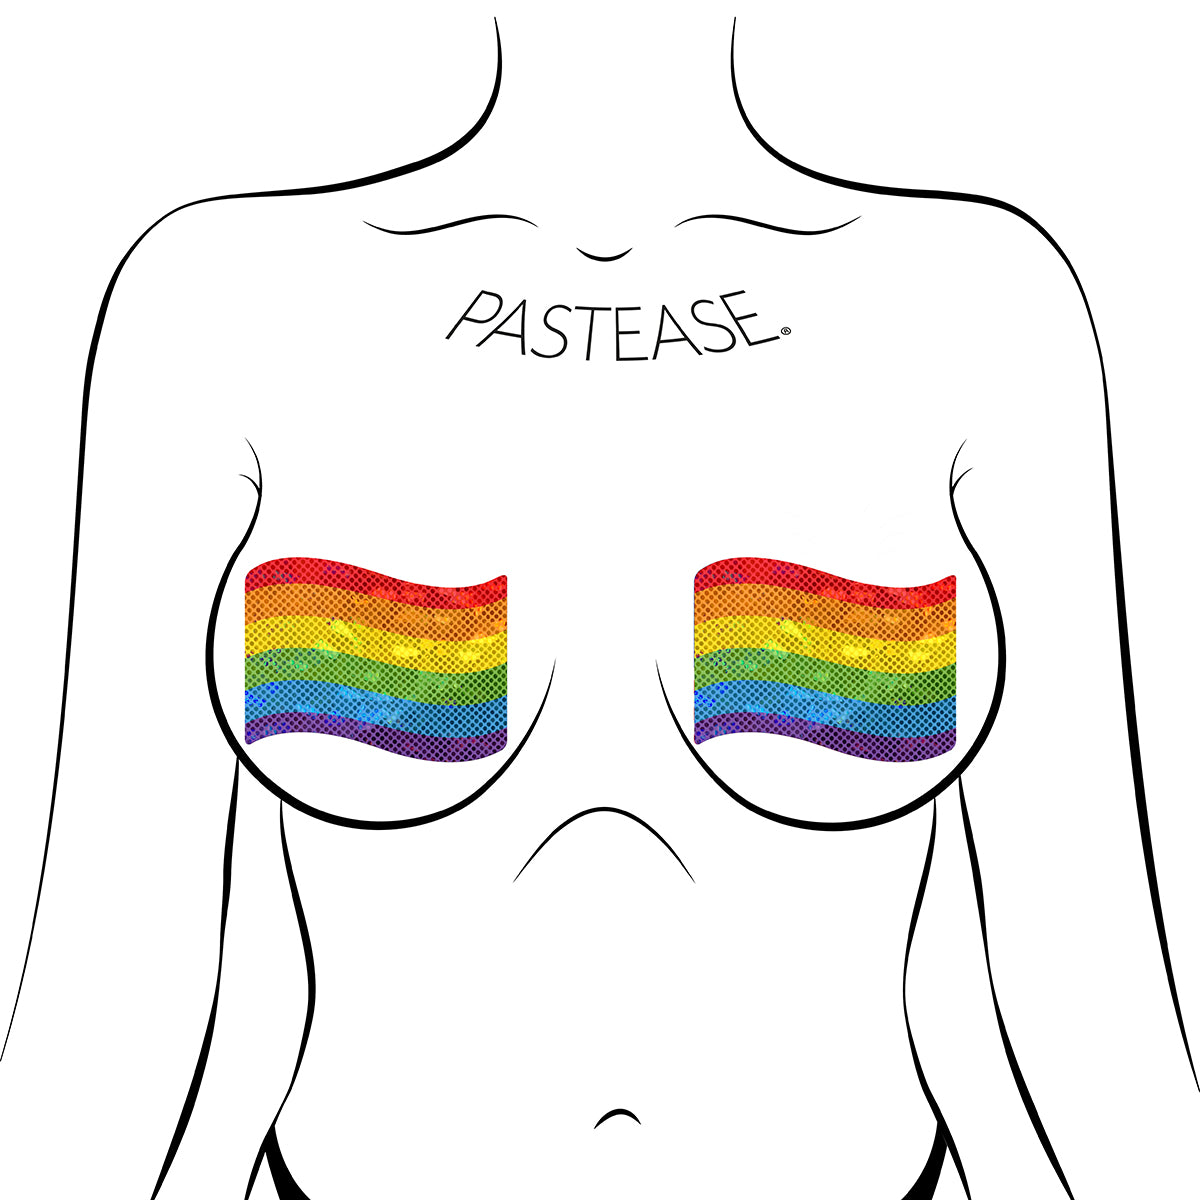 Pastease Rainbow Flags Intimates Adult Boutique